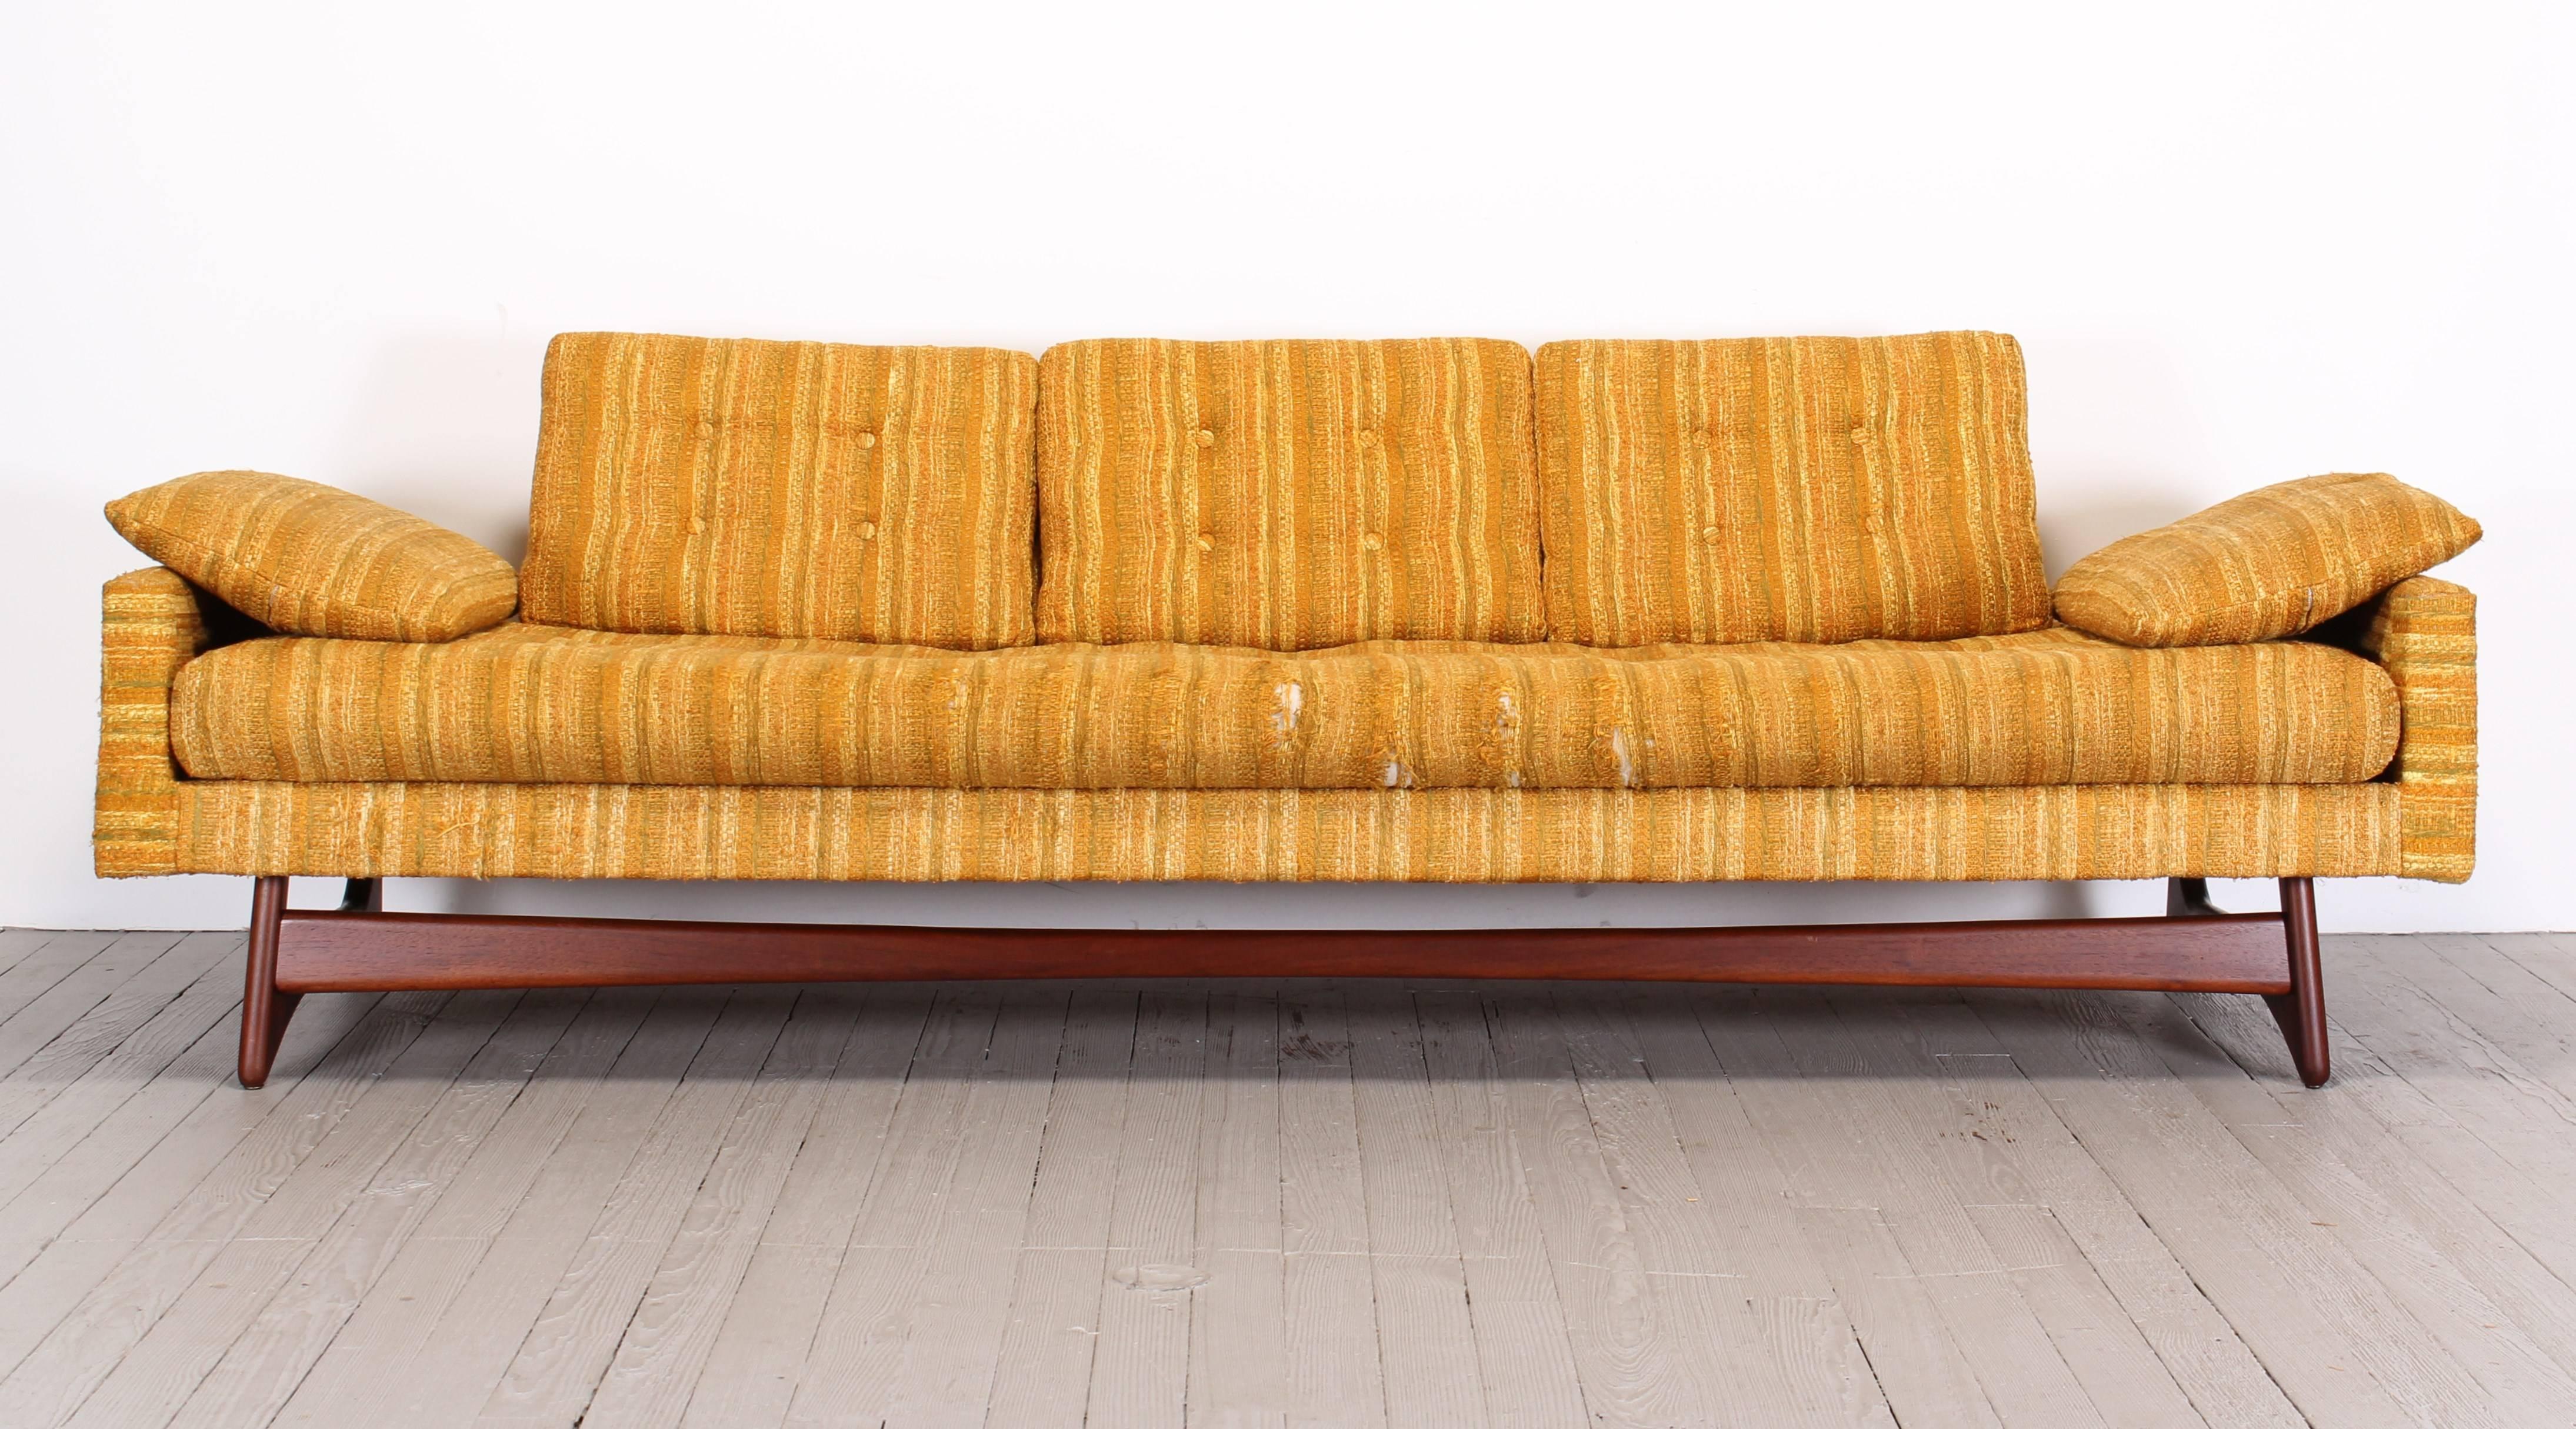 A sofa, model 2408 by Adrian Pearsall for Craft Associates, 1960. New upholstery needed. Walnut base newly refinished. Dimensions found below. Seat depth without back cushions 27